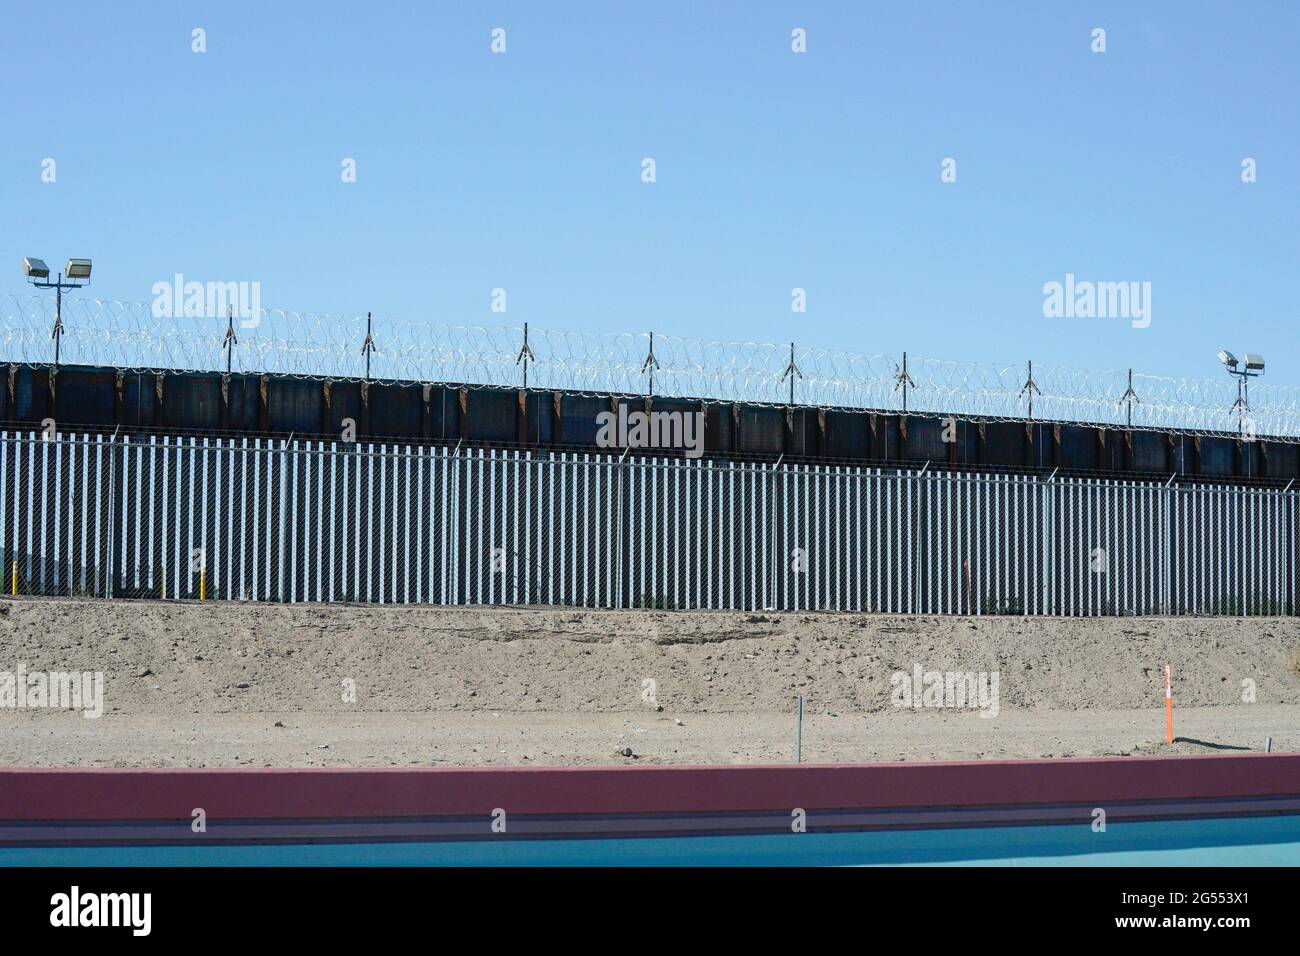 El Paso, United States. 25th June, 2021. The Trump border wall stands when U.S. Vice President Kamala Harris visits the Paso del Norte (PDN) Port of Entry in El Paso, Texas on June 25, 2021 Photo by Yuri Gripas/UPI Credit: UPI/Alamy Live News Stock Photo